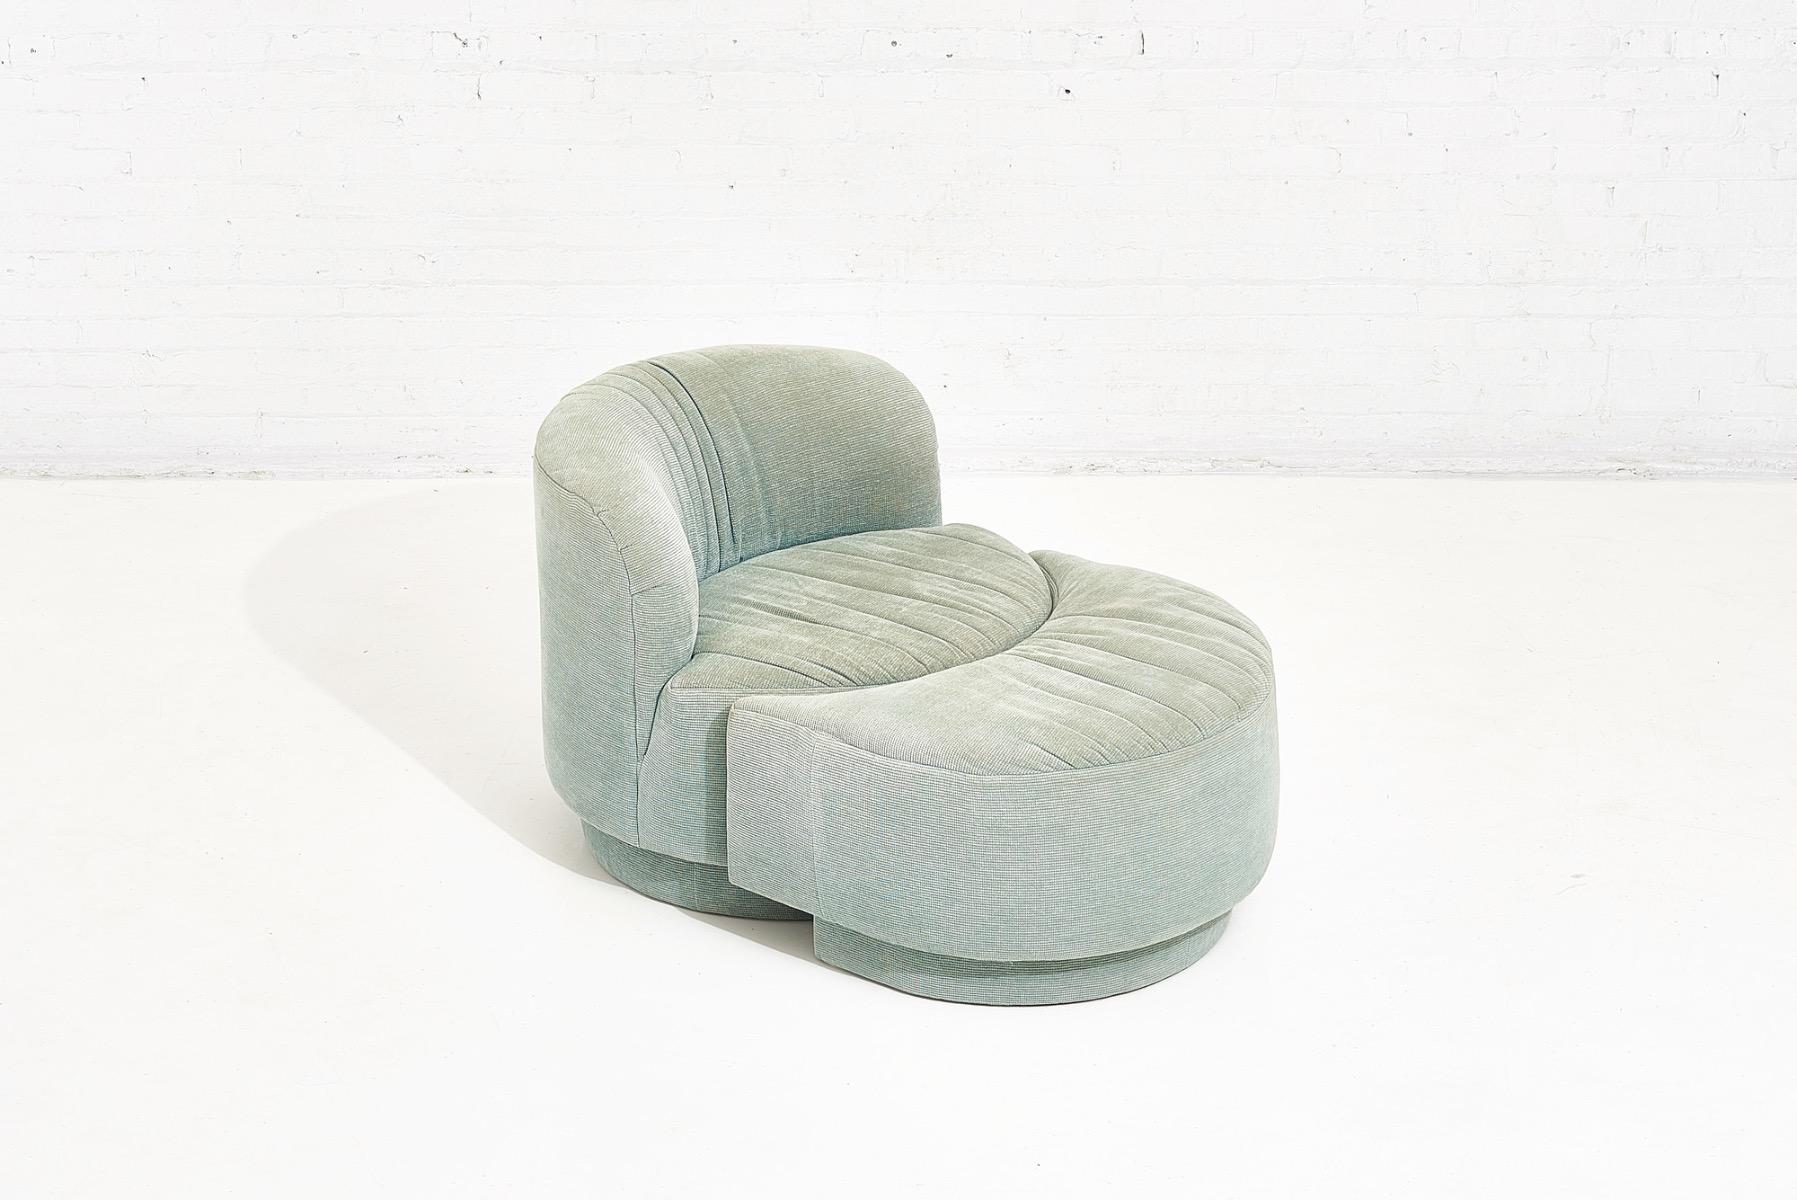 Late 20th Century Post Modern Swivel Chair with Pull Up Ottoman, 1980